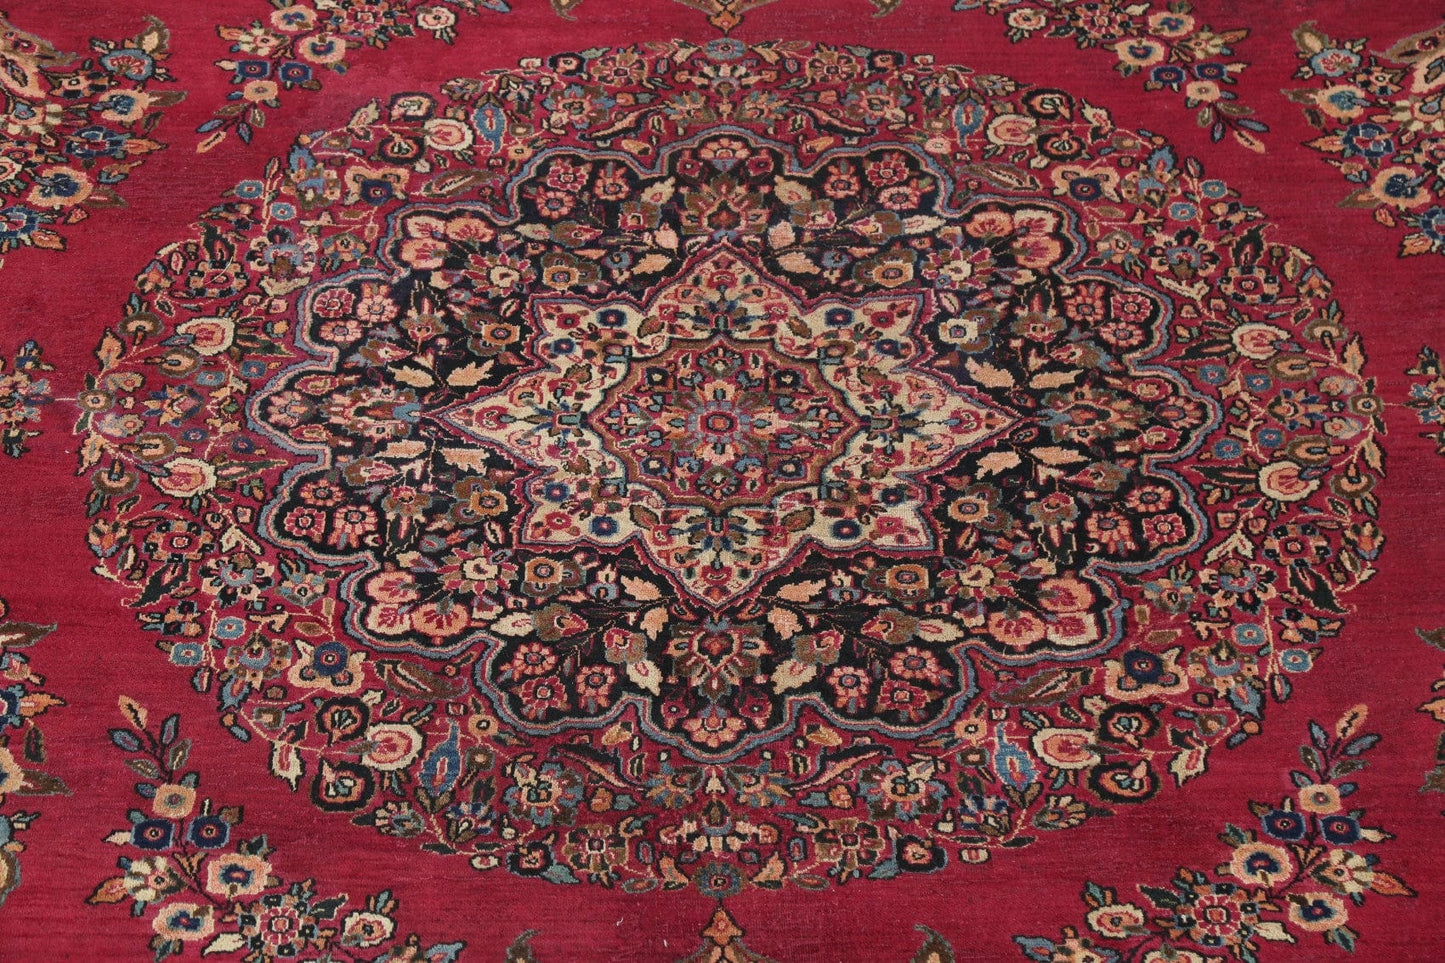 Antique Floral Red Dorokhsh Persian Rug Large 11x14